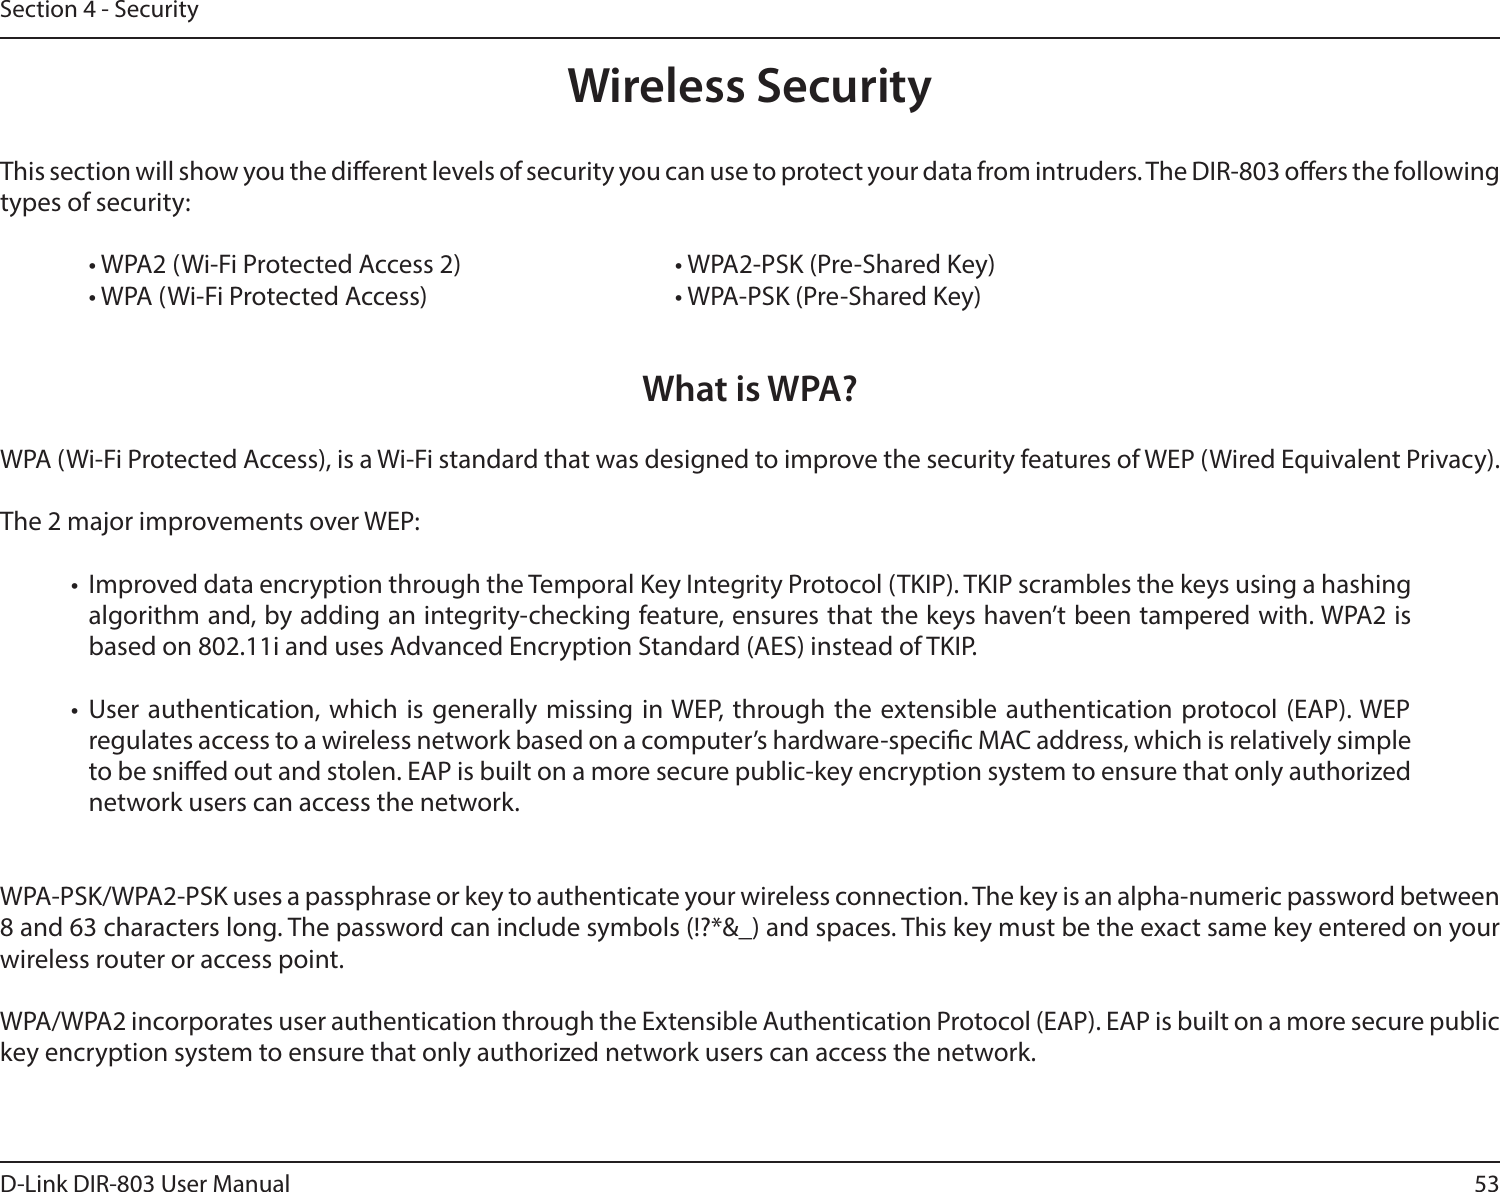 53D-Link DIR-803 User ManualSection 4 - SecurityWireless SecurityThis section will show you the dierent levels of security you can use to protect your data from intruders. The DIR-803 oers the following types of security:  • WPA2 (Wi-Fi Protected Access 2)       • WPA2-PSK (Pre-Shared Key)  • WPA (Wi-Fi Protected Access)        • WPA-PSK (Pre-Shared Key)What is WPA?WPA (Wi-Fi Protected Access), is a Wi-Fi standard that was designed to improve the security features of WEP (Wired Equivalent Privacy).  The 2 major improvements over WEP: •  Improved data encryption through the Temporal Key Integrity Protocol (TKIP). TKIP scrambles the keys using a hashing algorithm and, by adding an integrity-checking feature, ensures that the keys haven’t been tampered with. WPA2 is based on 802.11i and uses Advanced Encryption Standard (AES) instead of TKIP.• User authentication, which is generally missing in WEP, through the extensible authentication protocol (EAP). WEP regulates access to a wireless network based on a computer’s hardware-specic MAC address, which is relatively simple to be snied out and stolen. EAP is built on a more secure public-key encryption system to ensure that only authorized network users can access the network.WPA-PSK/WPA2-PSK uses a passphrase or key to authenticate your wireless connection. The key is an alpha-numeric password between 8 and 63 characters long. The password can include symbols (!?*&amp;_) and spaces. This key must be the exact same key entered on your wireless router or access point.WPA/WPA2 incorporates user authentication through the Extensible Authentication Protocol (EAP). EAP is built on a more secure public key encryption system to ensure that only authorized network users can access the network.